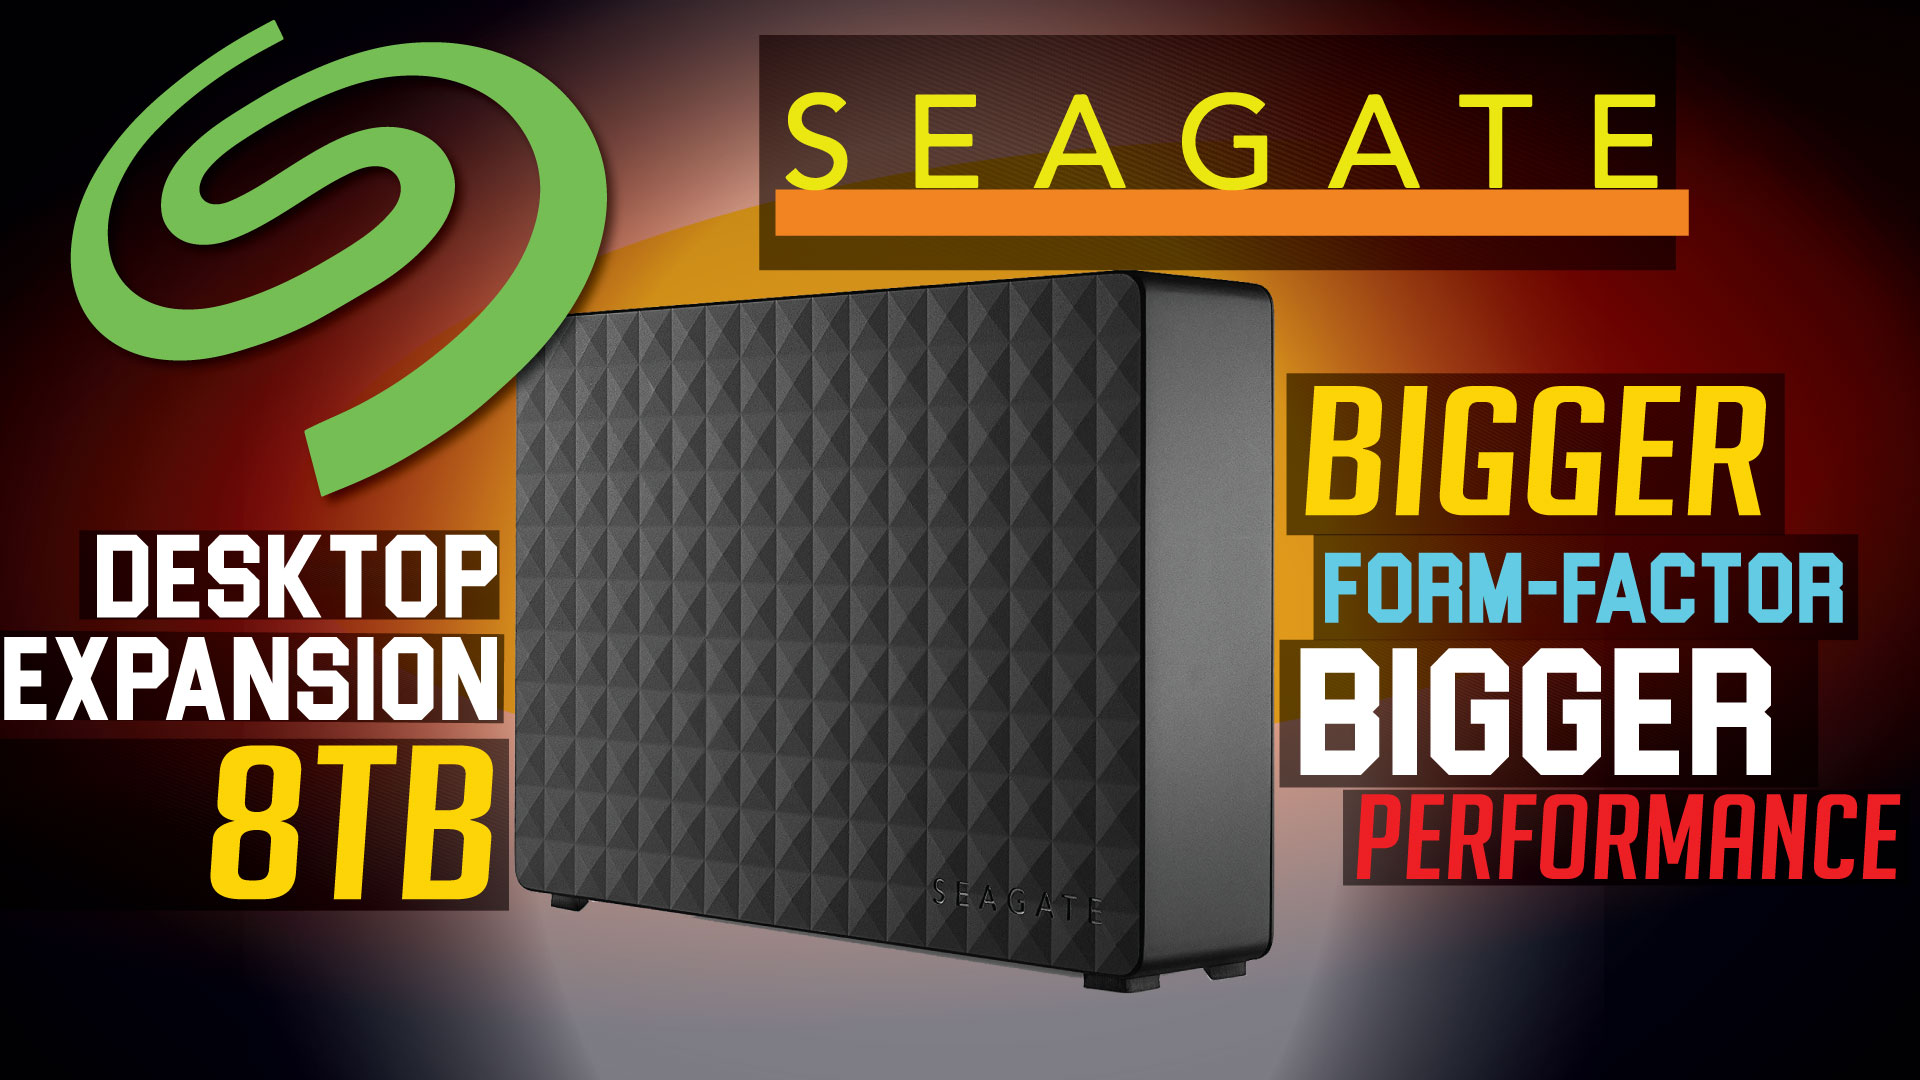 Seagate Desktop Expansion 8TB Review Reviews Hardware | Real